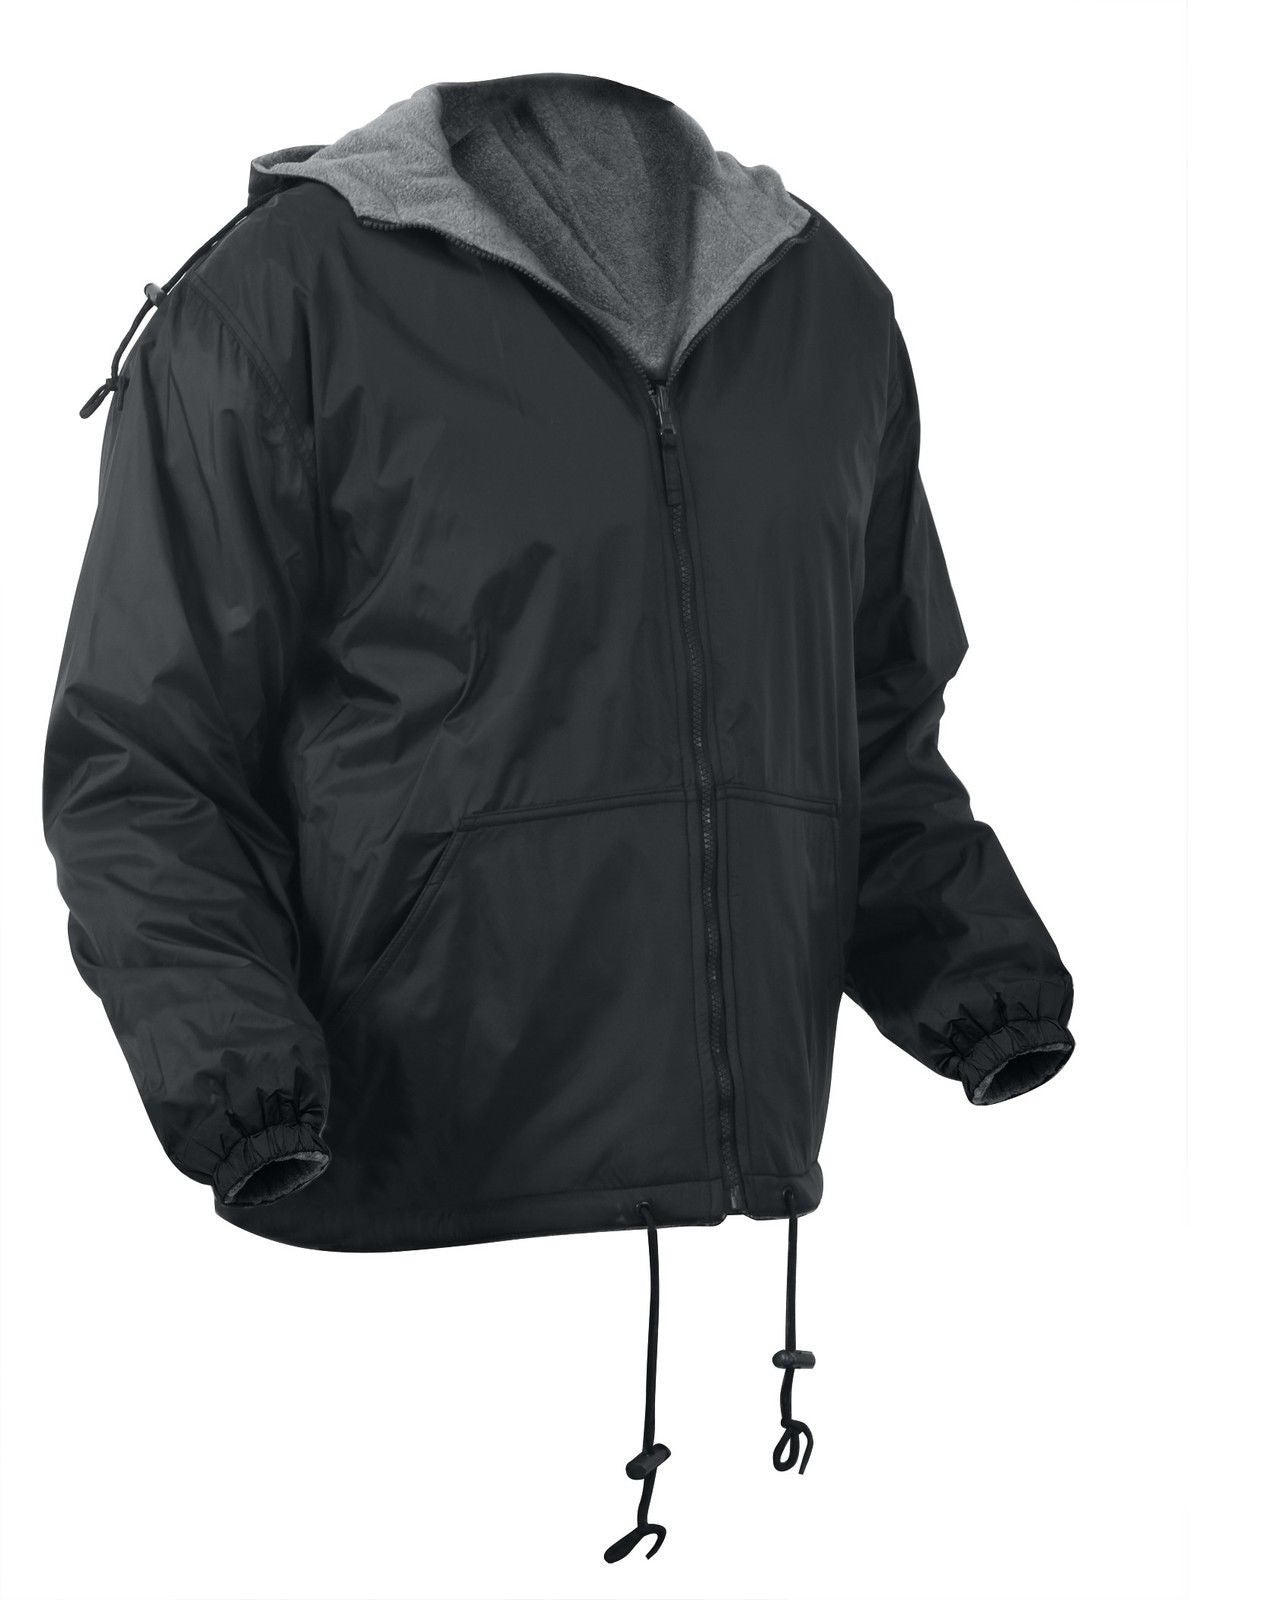 Rothco Reversible Lined Jacket with Hood (Black) Large